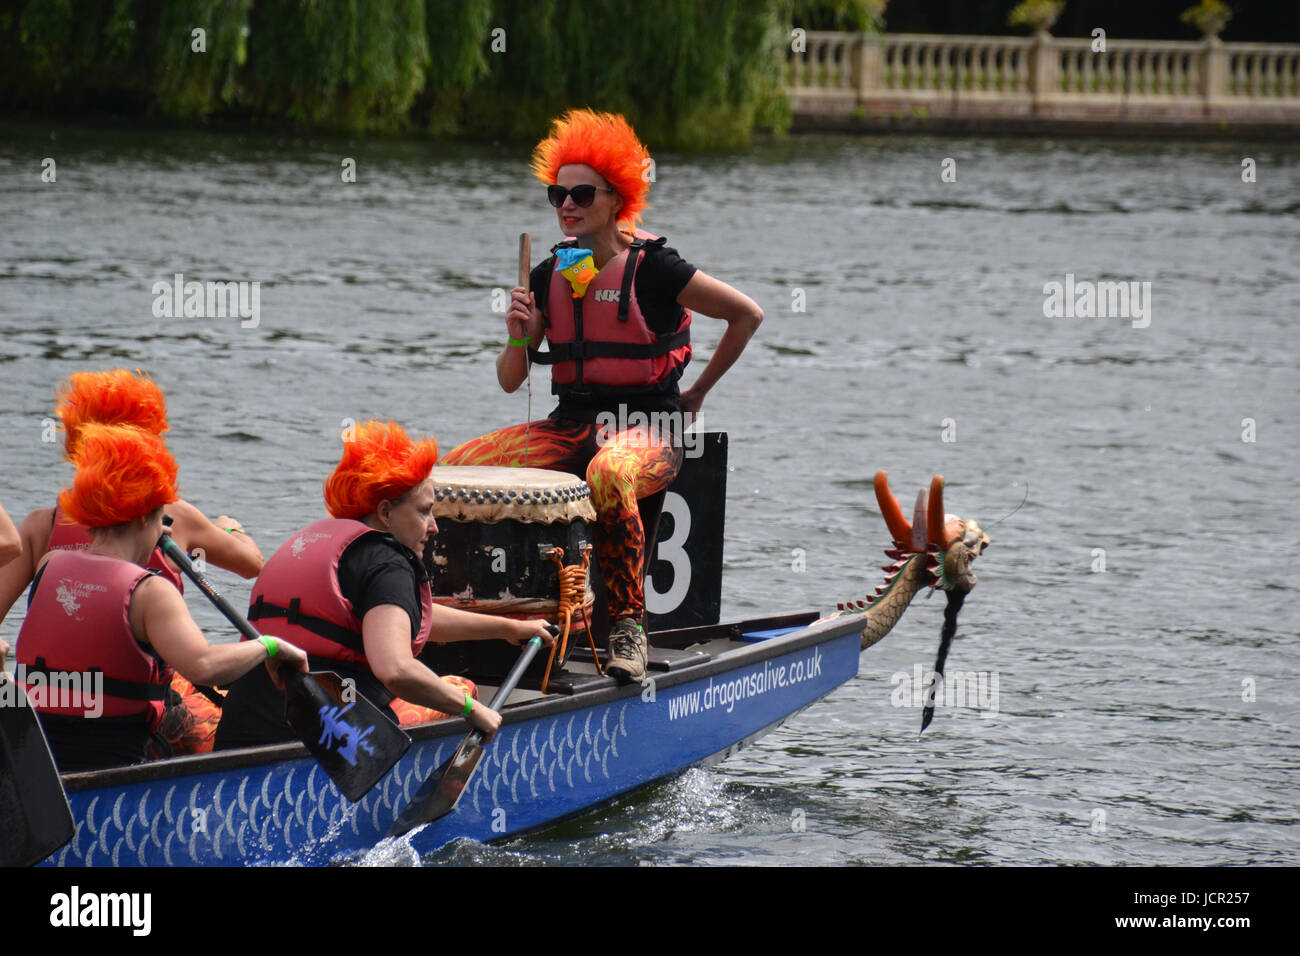 Team with firey orange hair at the Marlow dragon boat races on the River Thames, Marlow, Buckinghamshire, England, UK Stock Photo